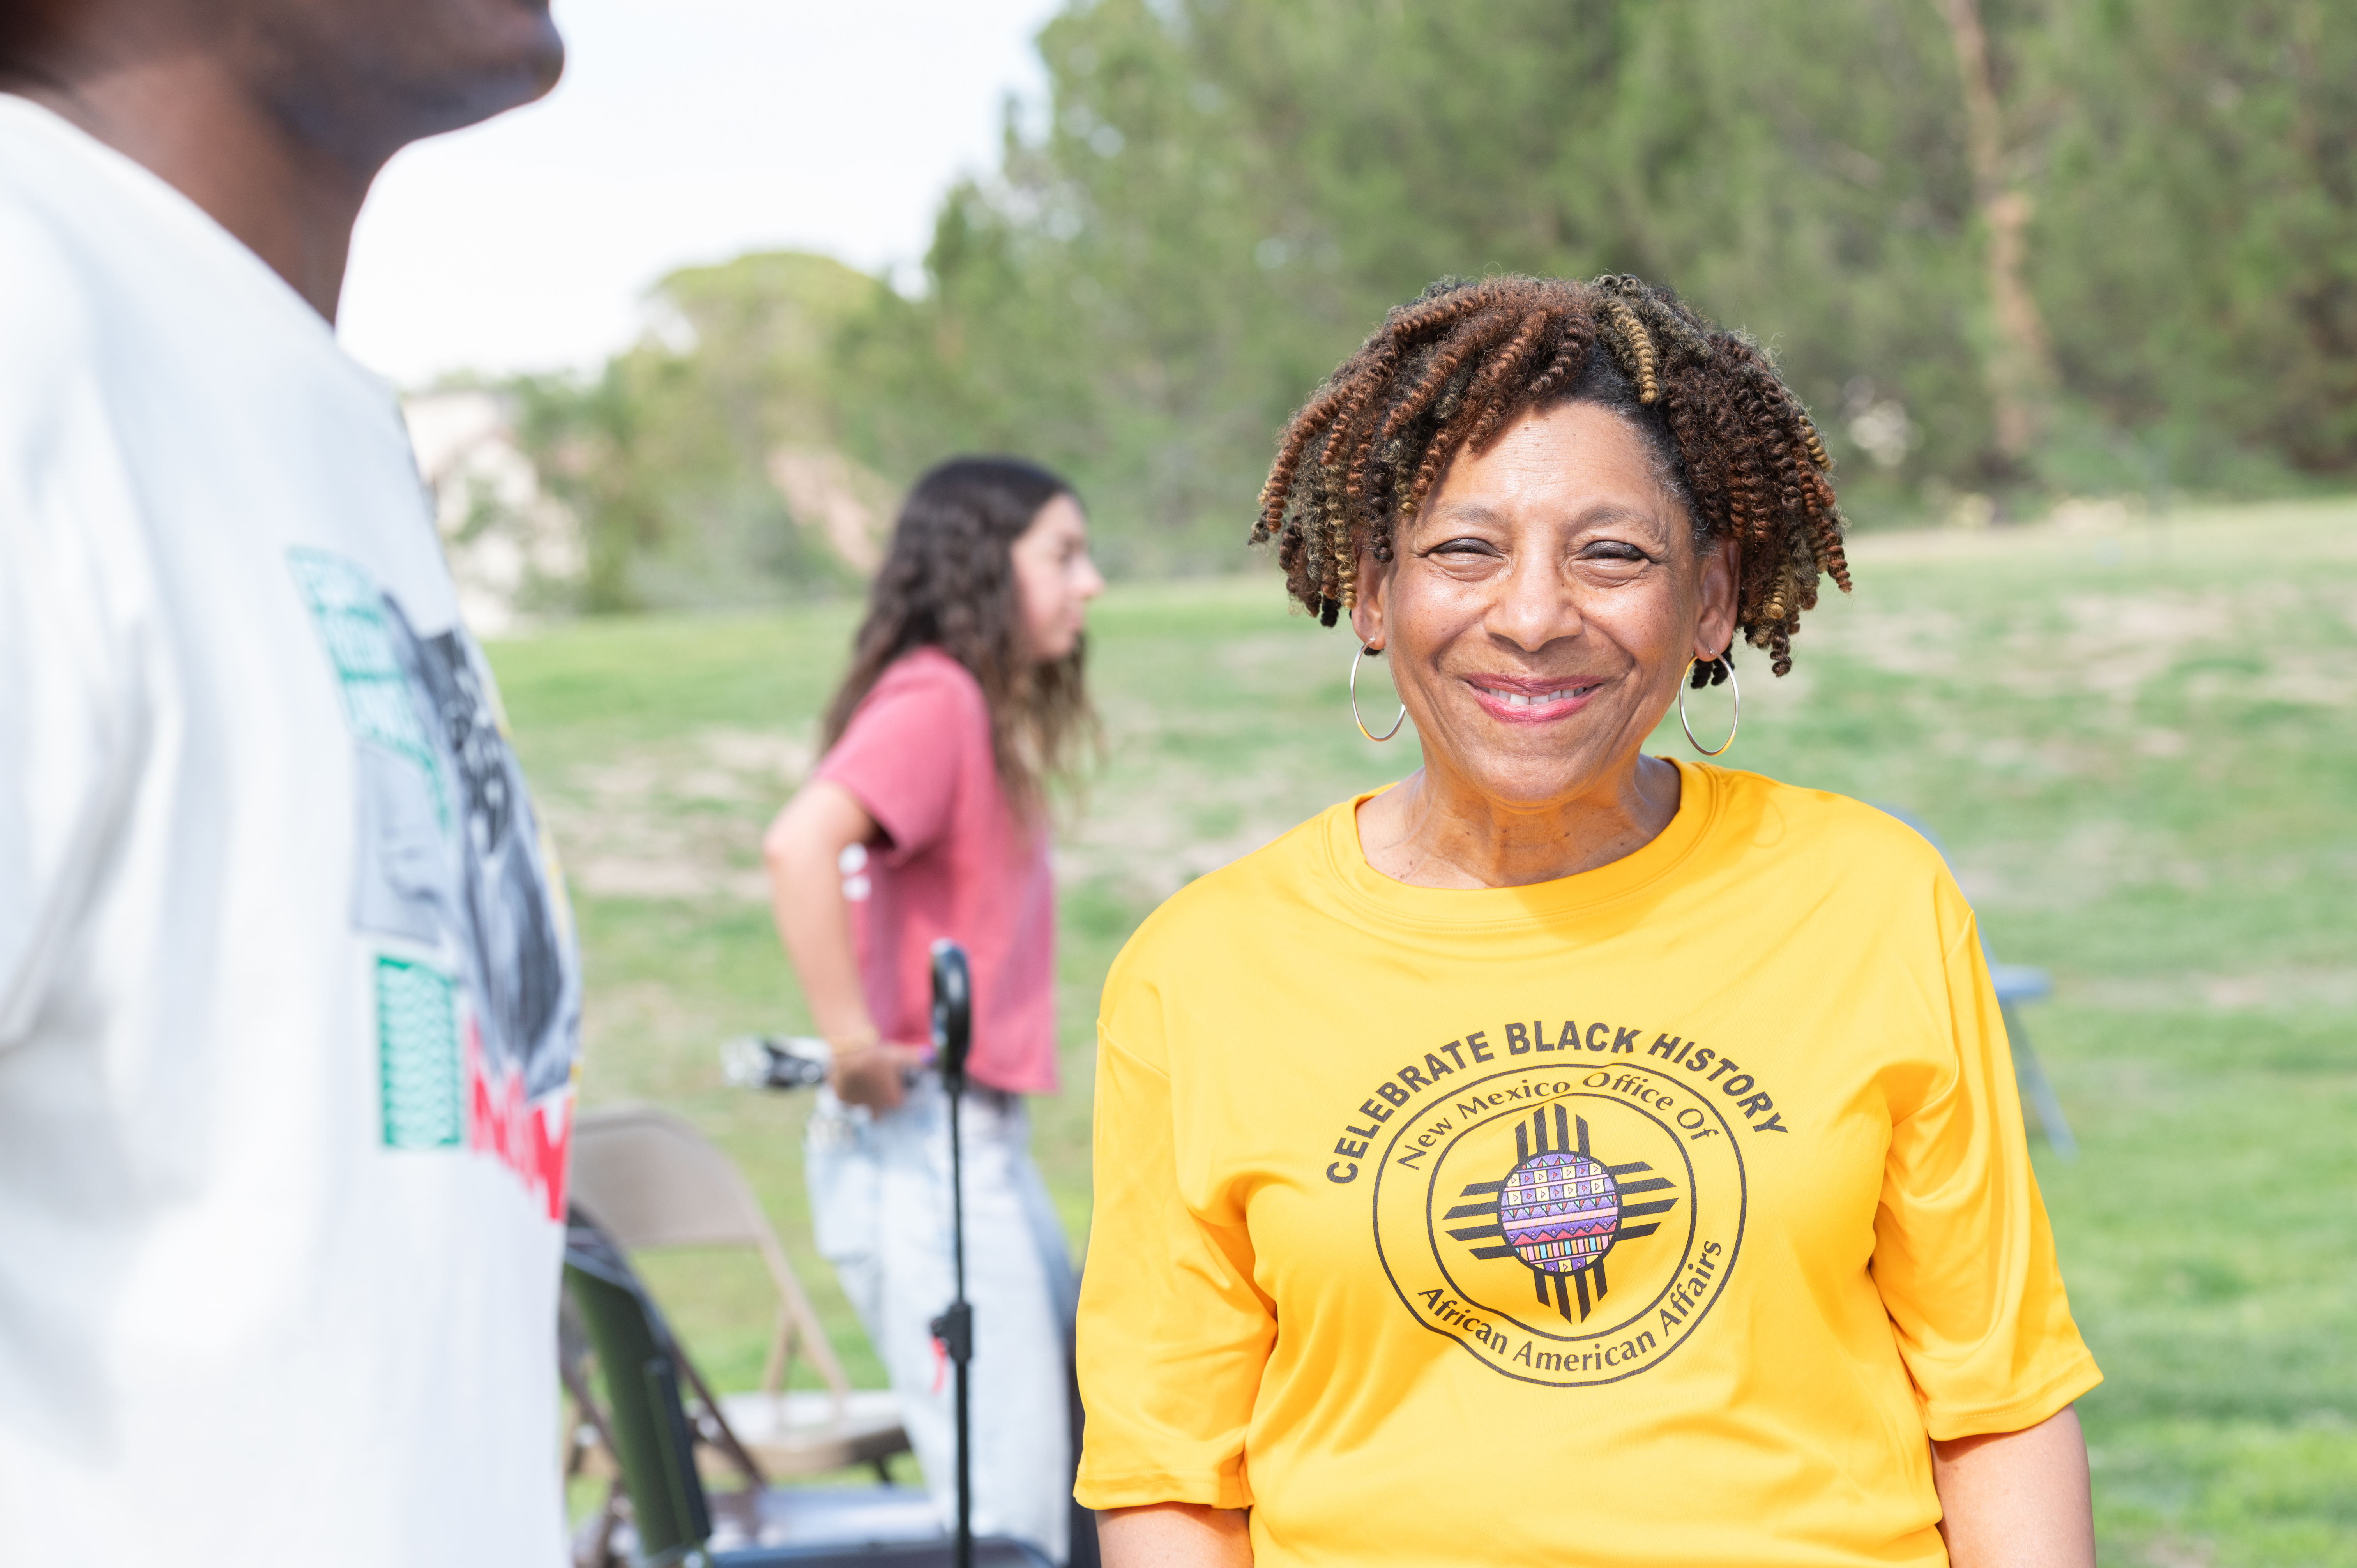 Cheerful woman in a yellow T-shirt with "Celebrate Black History, New Mexico Office of African American Affairs" printed on it, standing in an outdoor park.